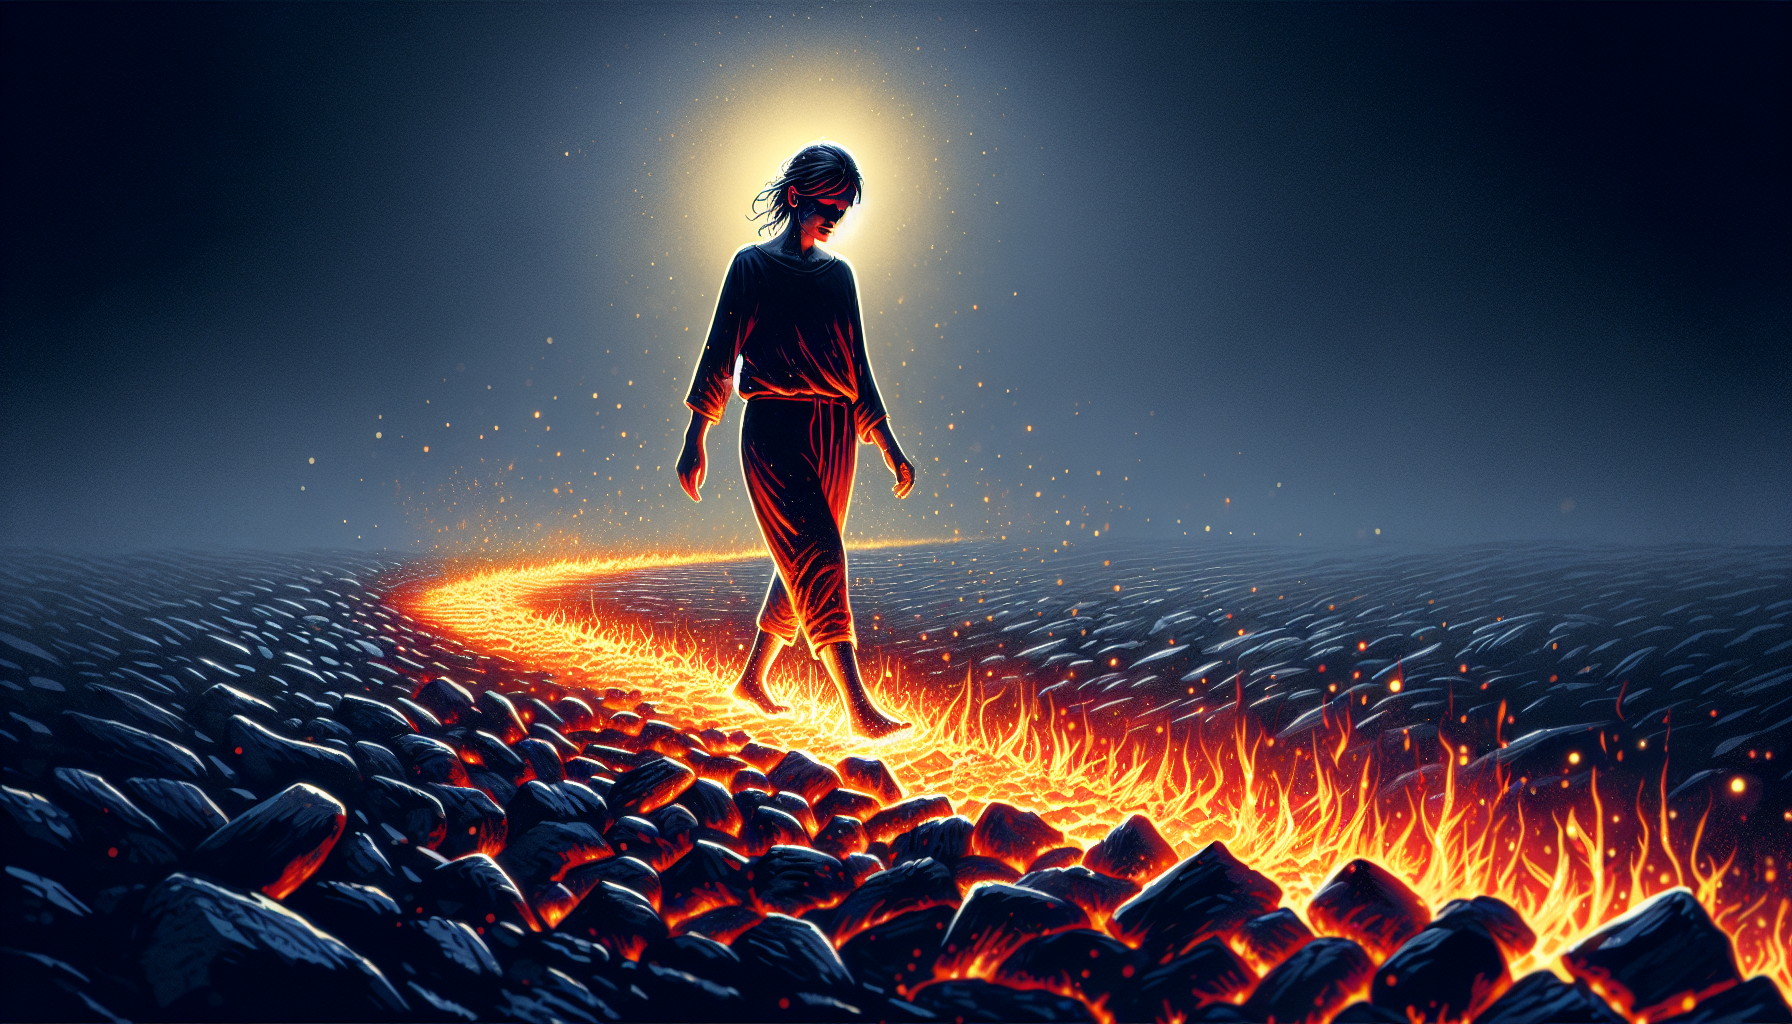 Illustration of a person walking on hot coals